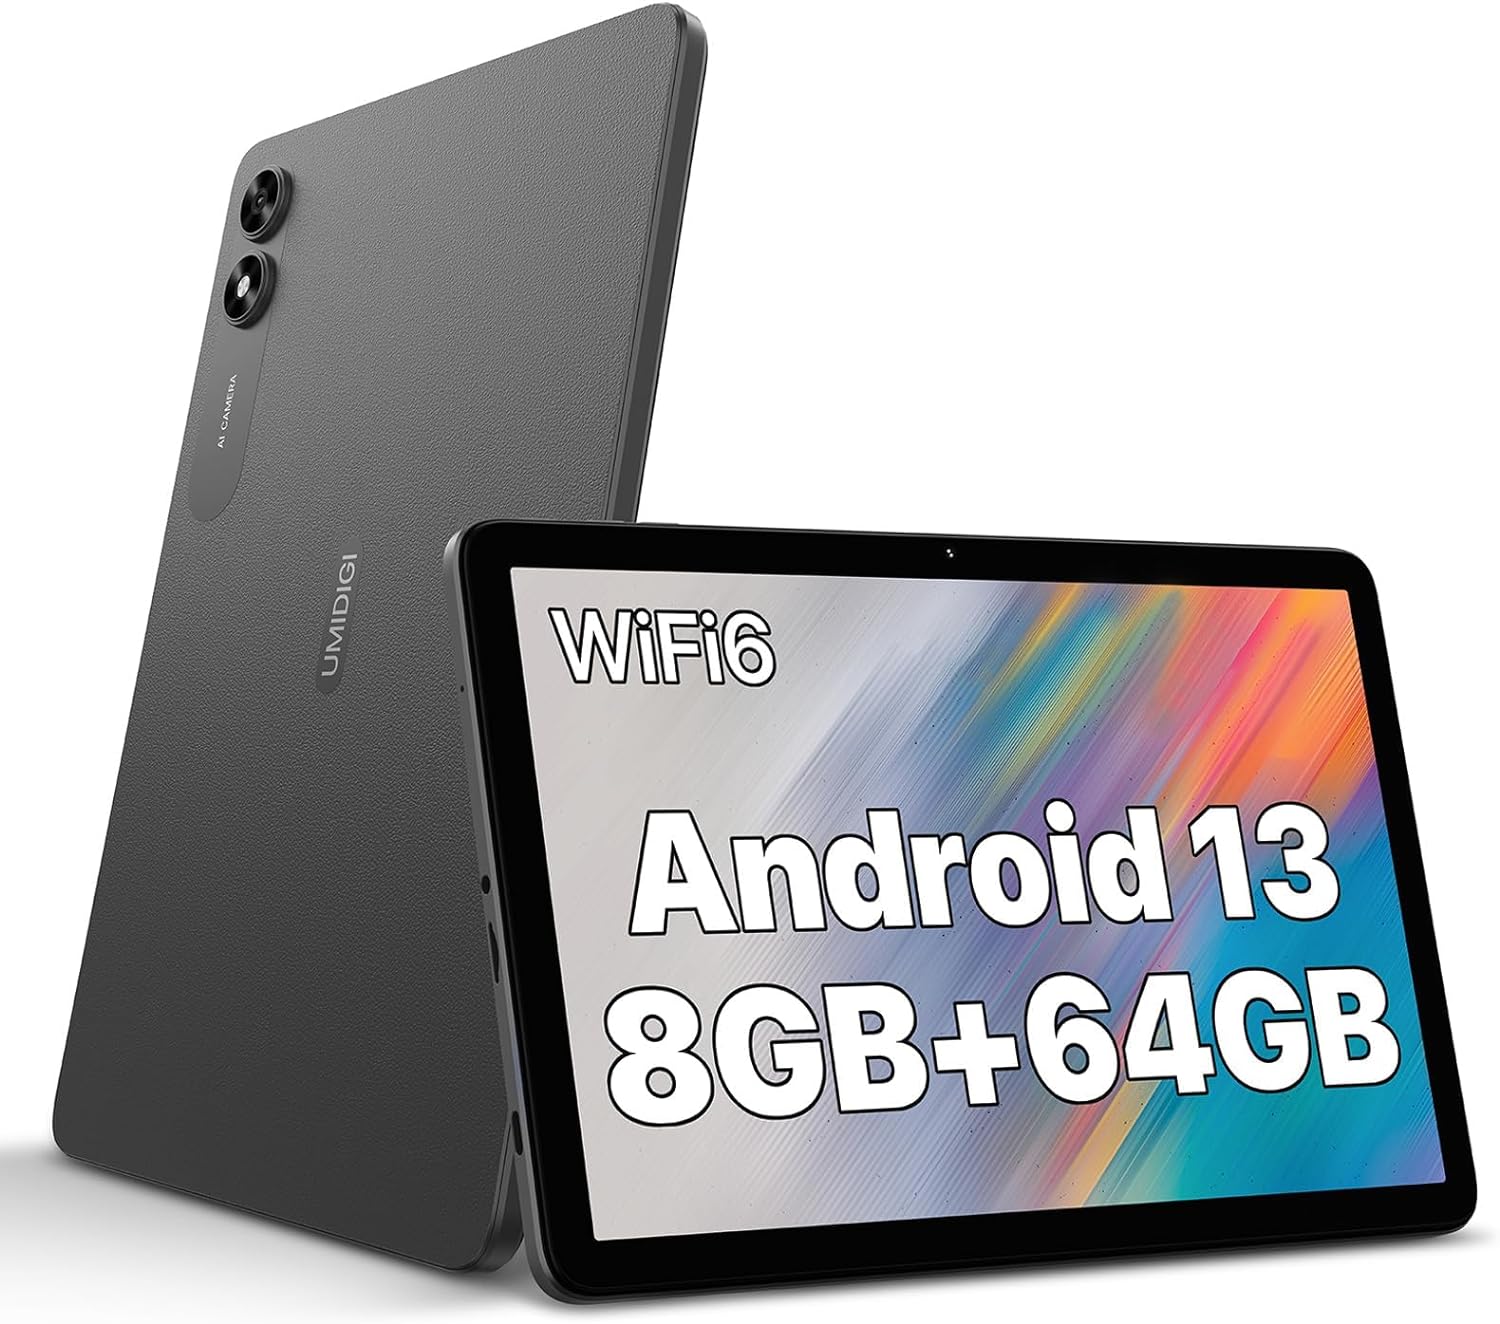 UMIDIGI G2 Tab Tablet Android 13 Tablet 8(4+4) GB RAM+64GB up to 1TB 10.1 inch Tablet with Quad-Core Processor 8MP+8MP Dual Camera WiFi 6 Bluetooth 5.0 6000mAh Split Screen Android Tablet Gray